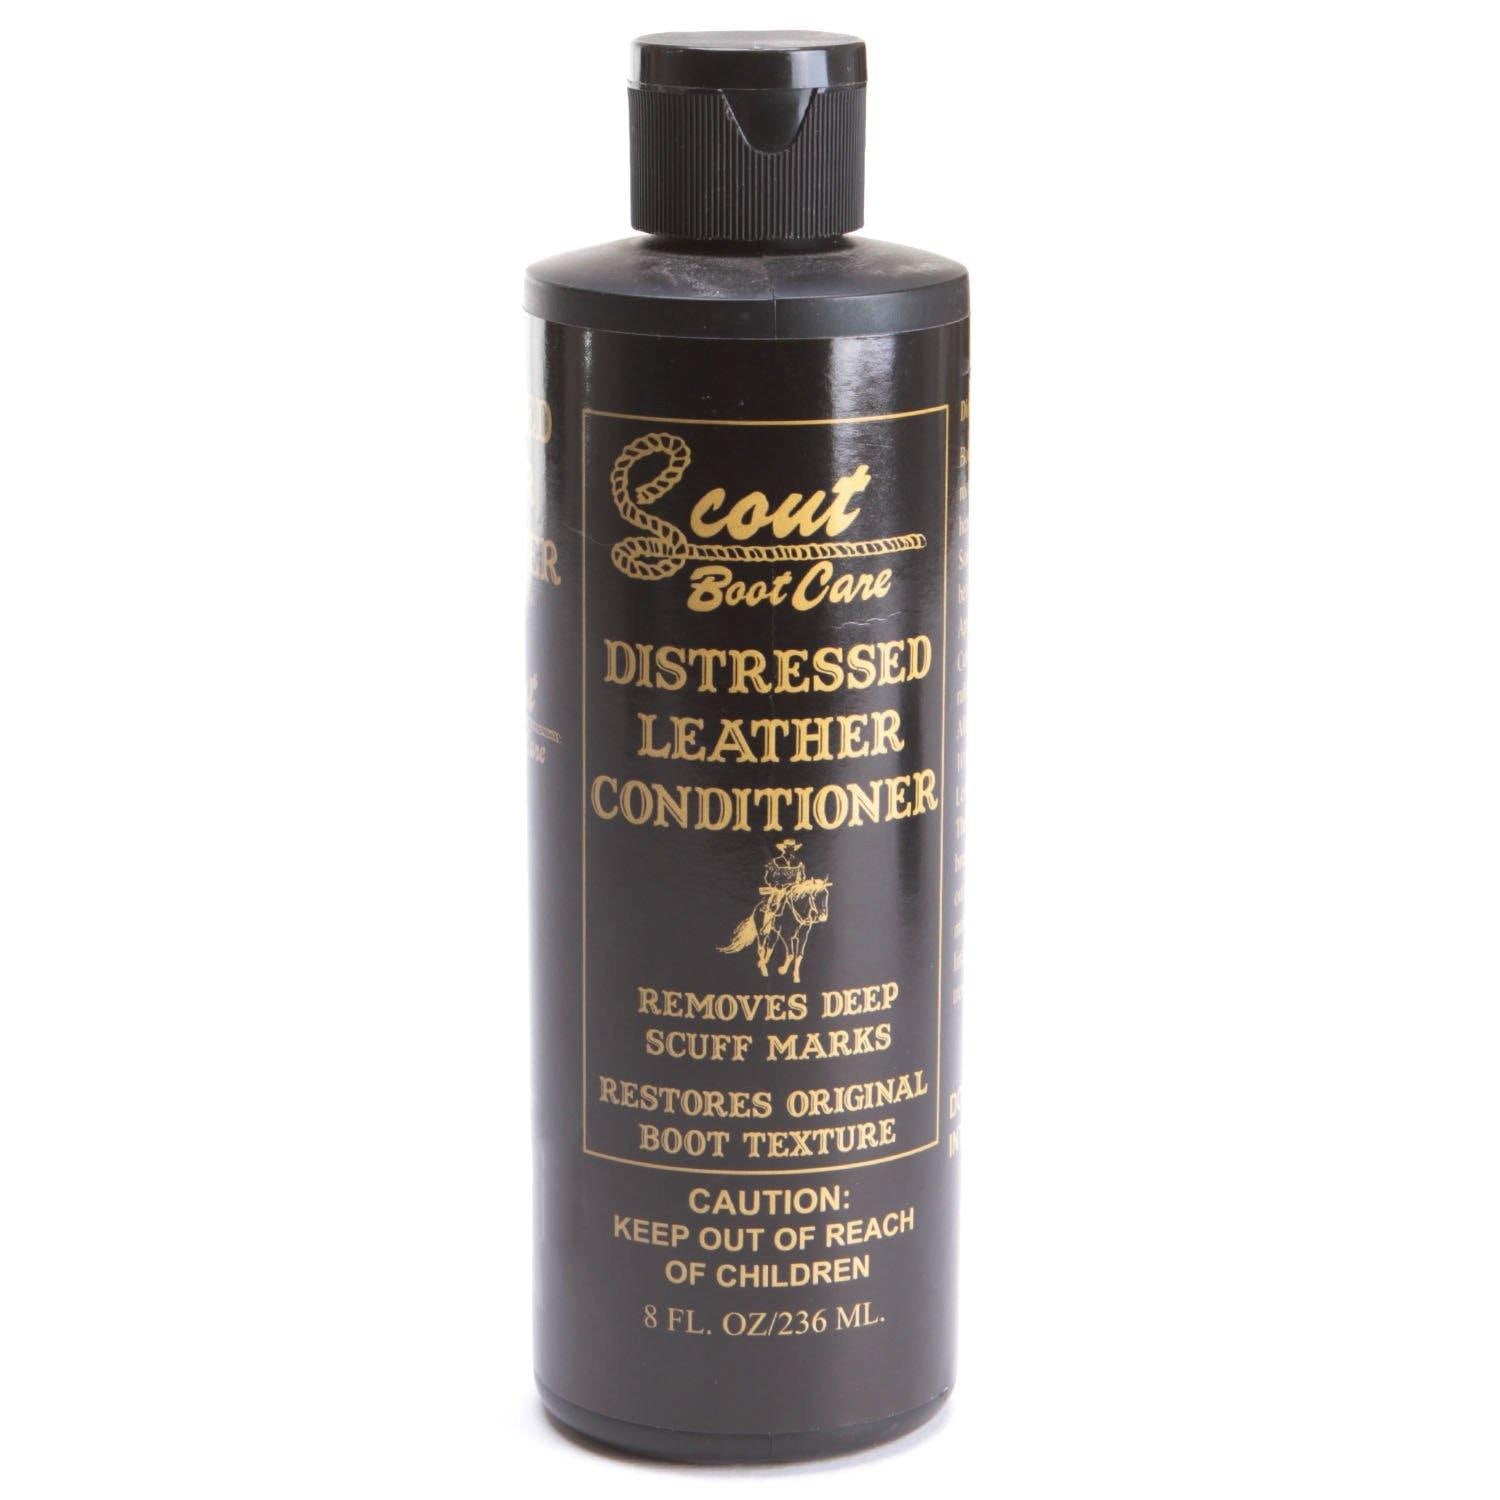 Distressed Leather Conditioner for Cowboy Boots - CWesternwear